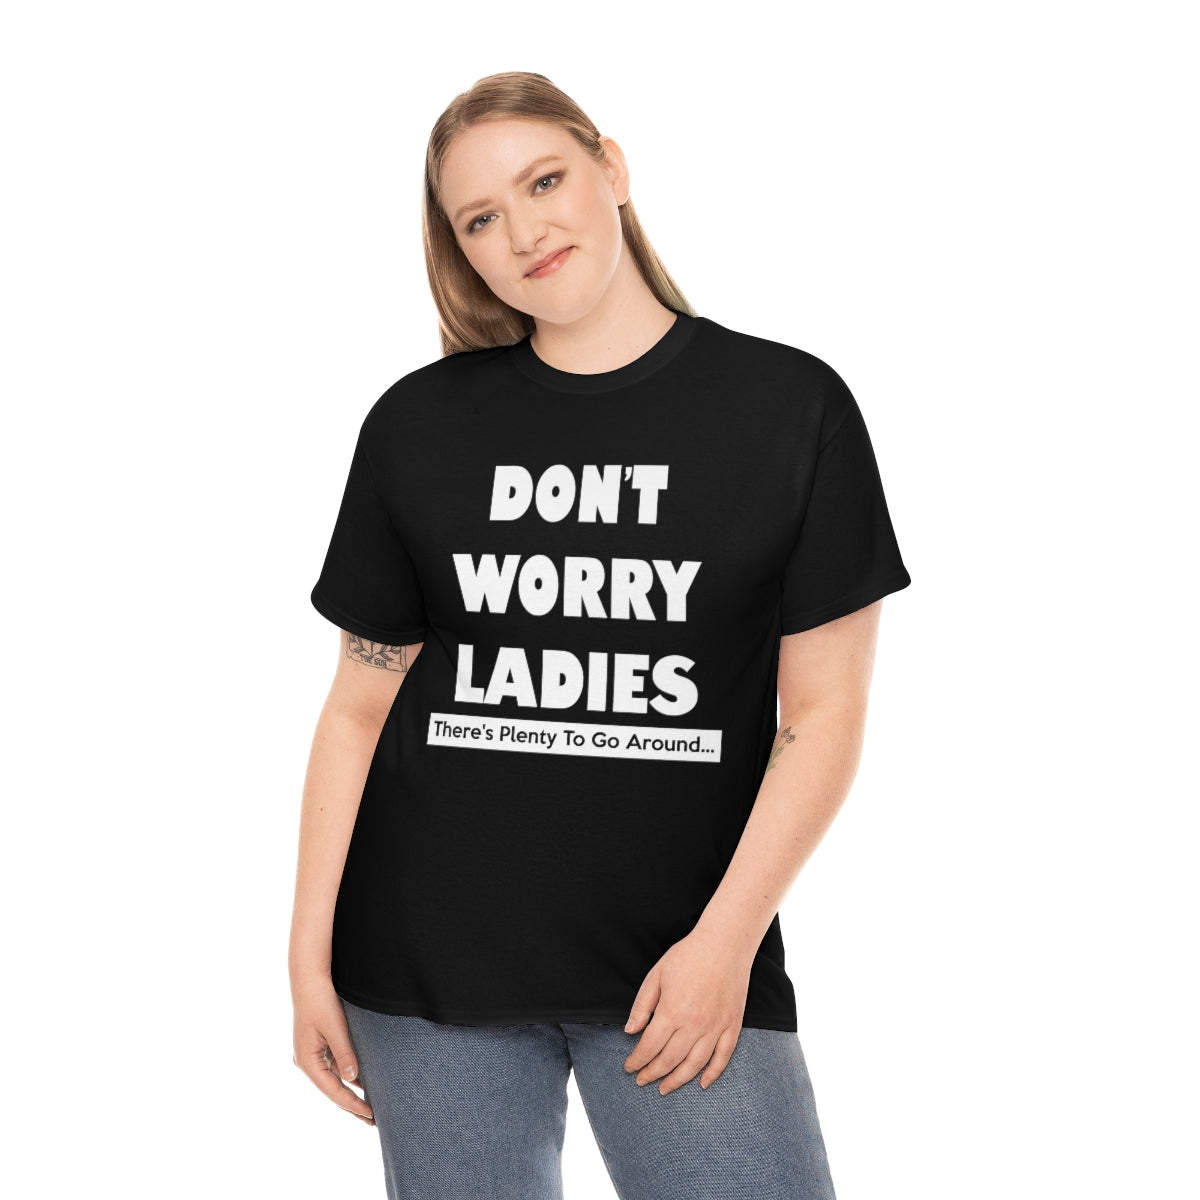 DON'T WORRY LADIES T-SHIRT